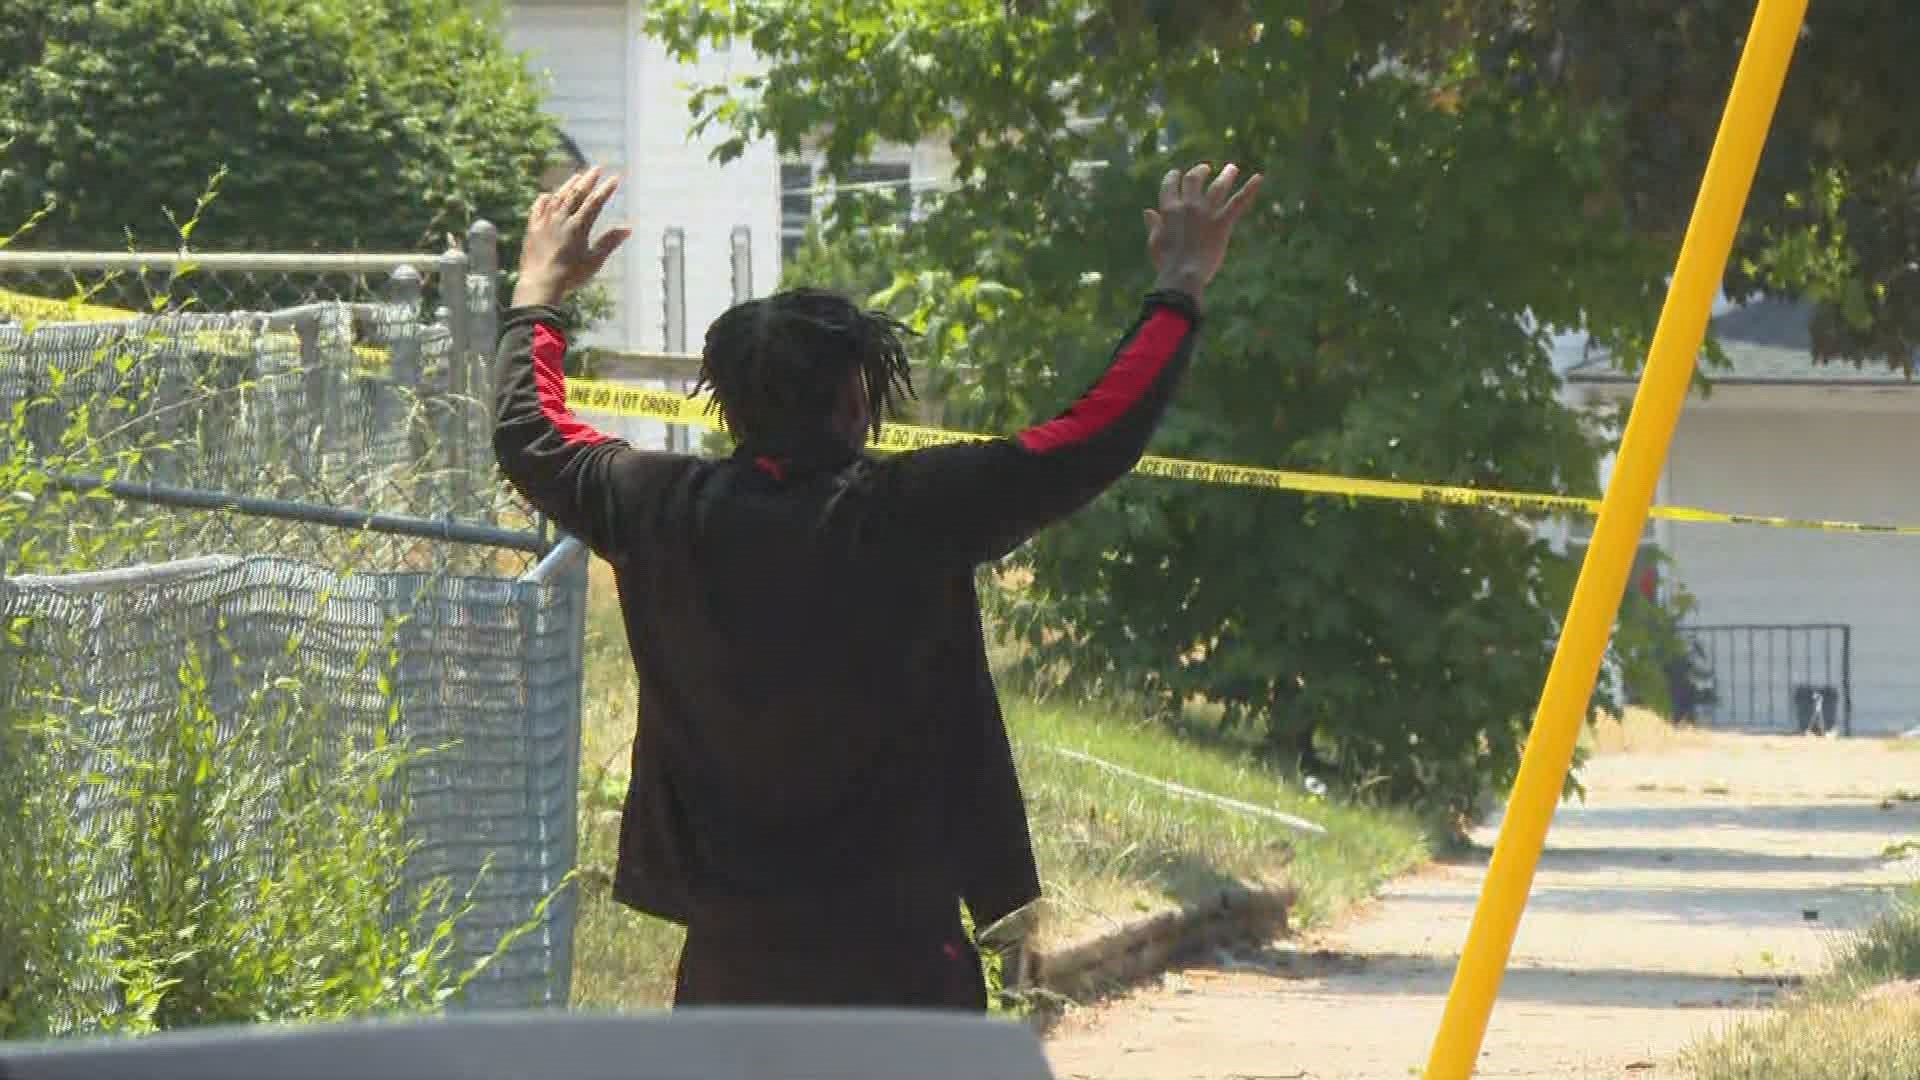 Around 1:15 p.m. Friday, a man walked out of a home near the intersection of Humbolt St SE & Marshall Ave SE in Grand Rapids with his hands in the air.